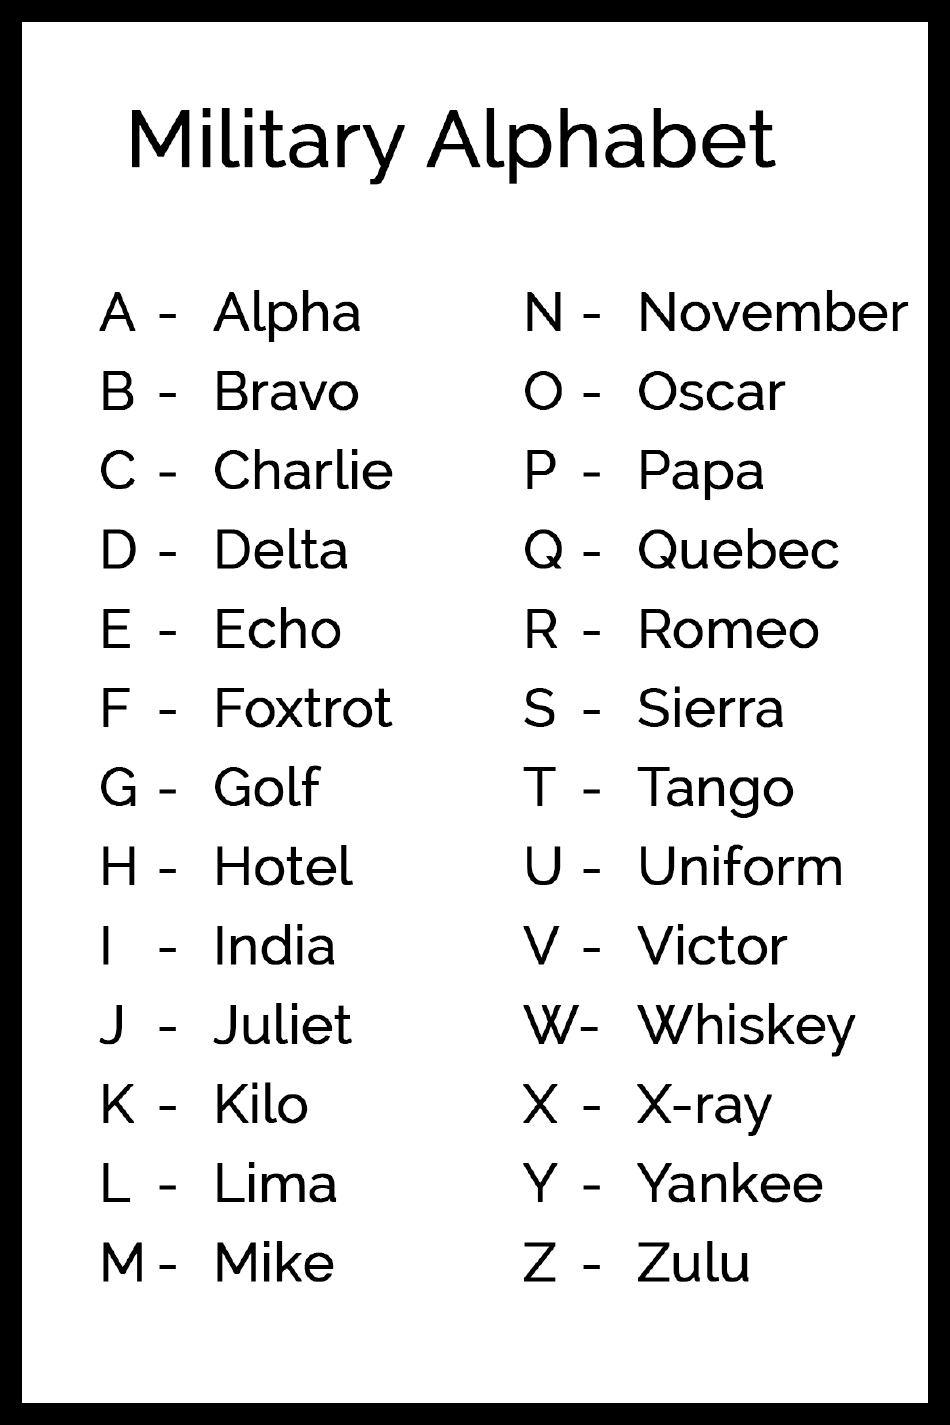 Military Alphabet Chart - Reference guide with Phonetic representation of each letter.